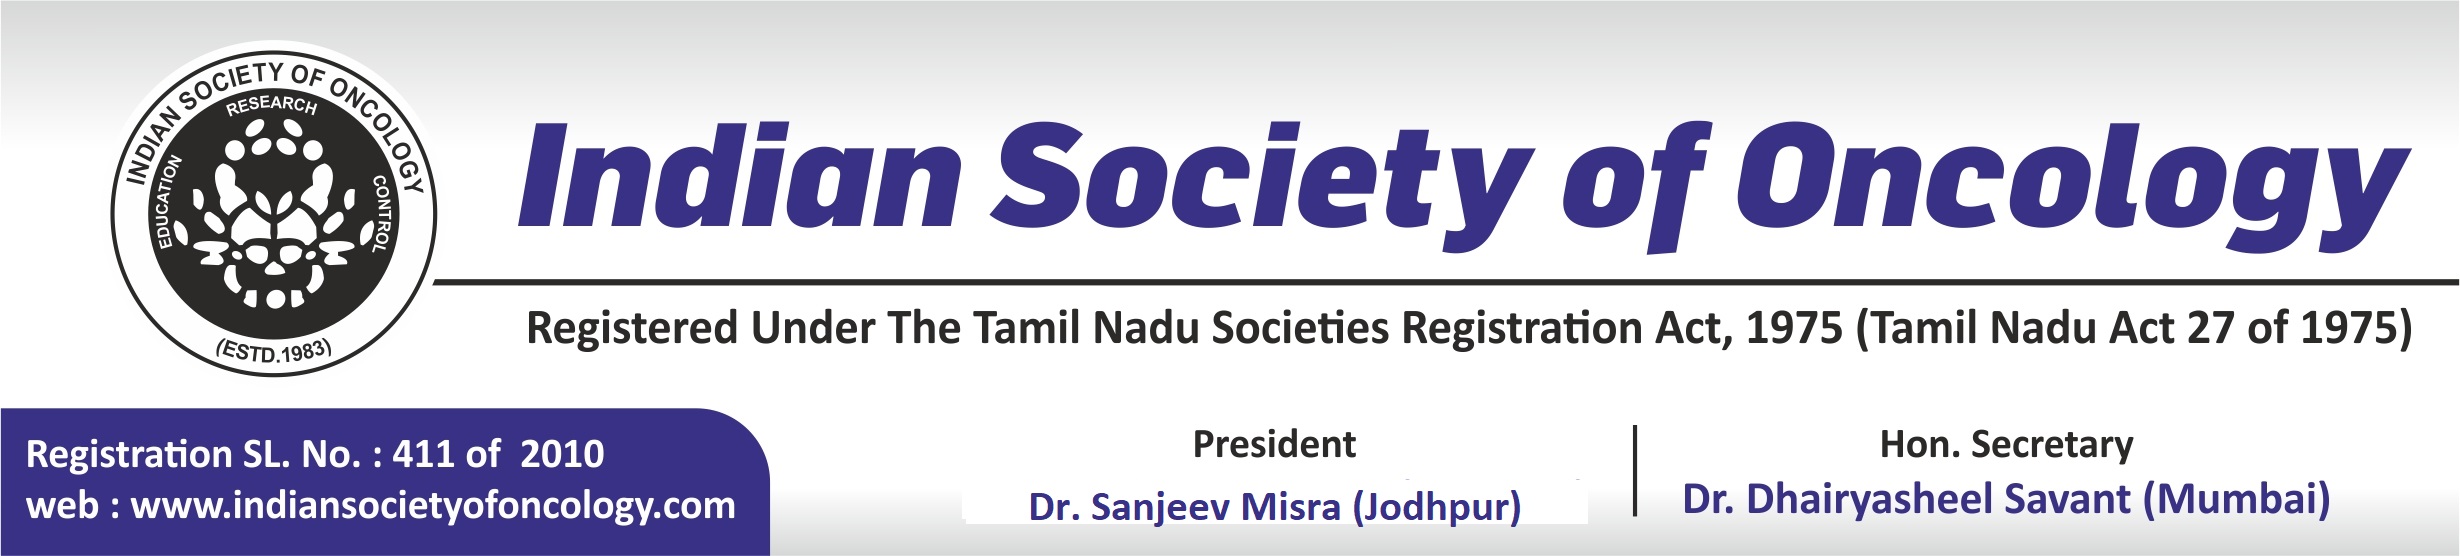 Indian Society of Oncology